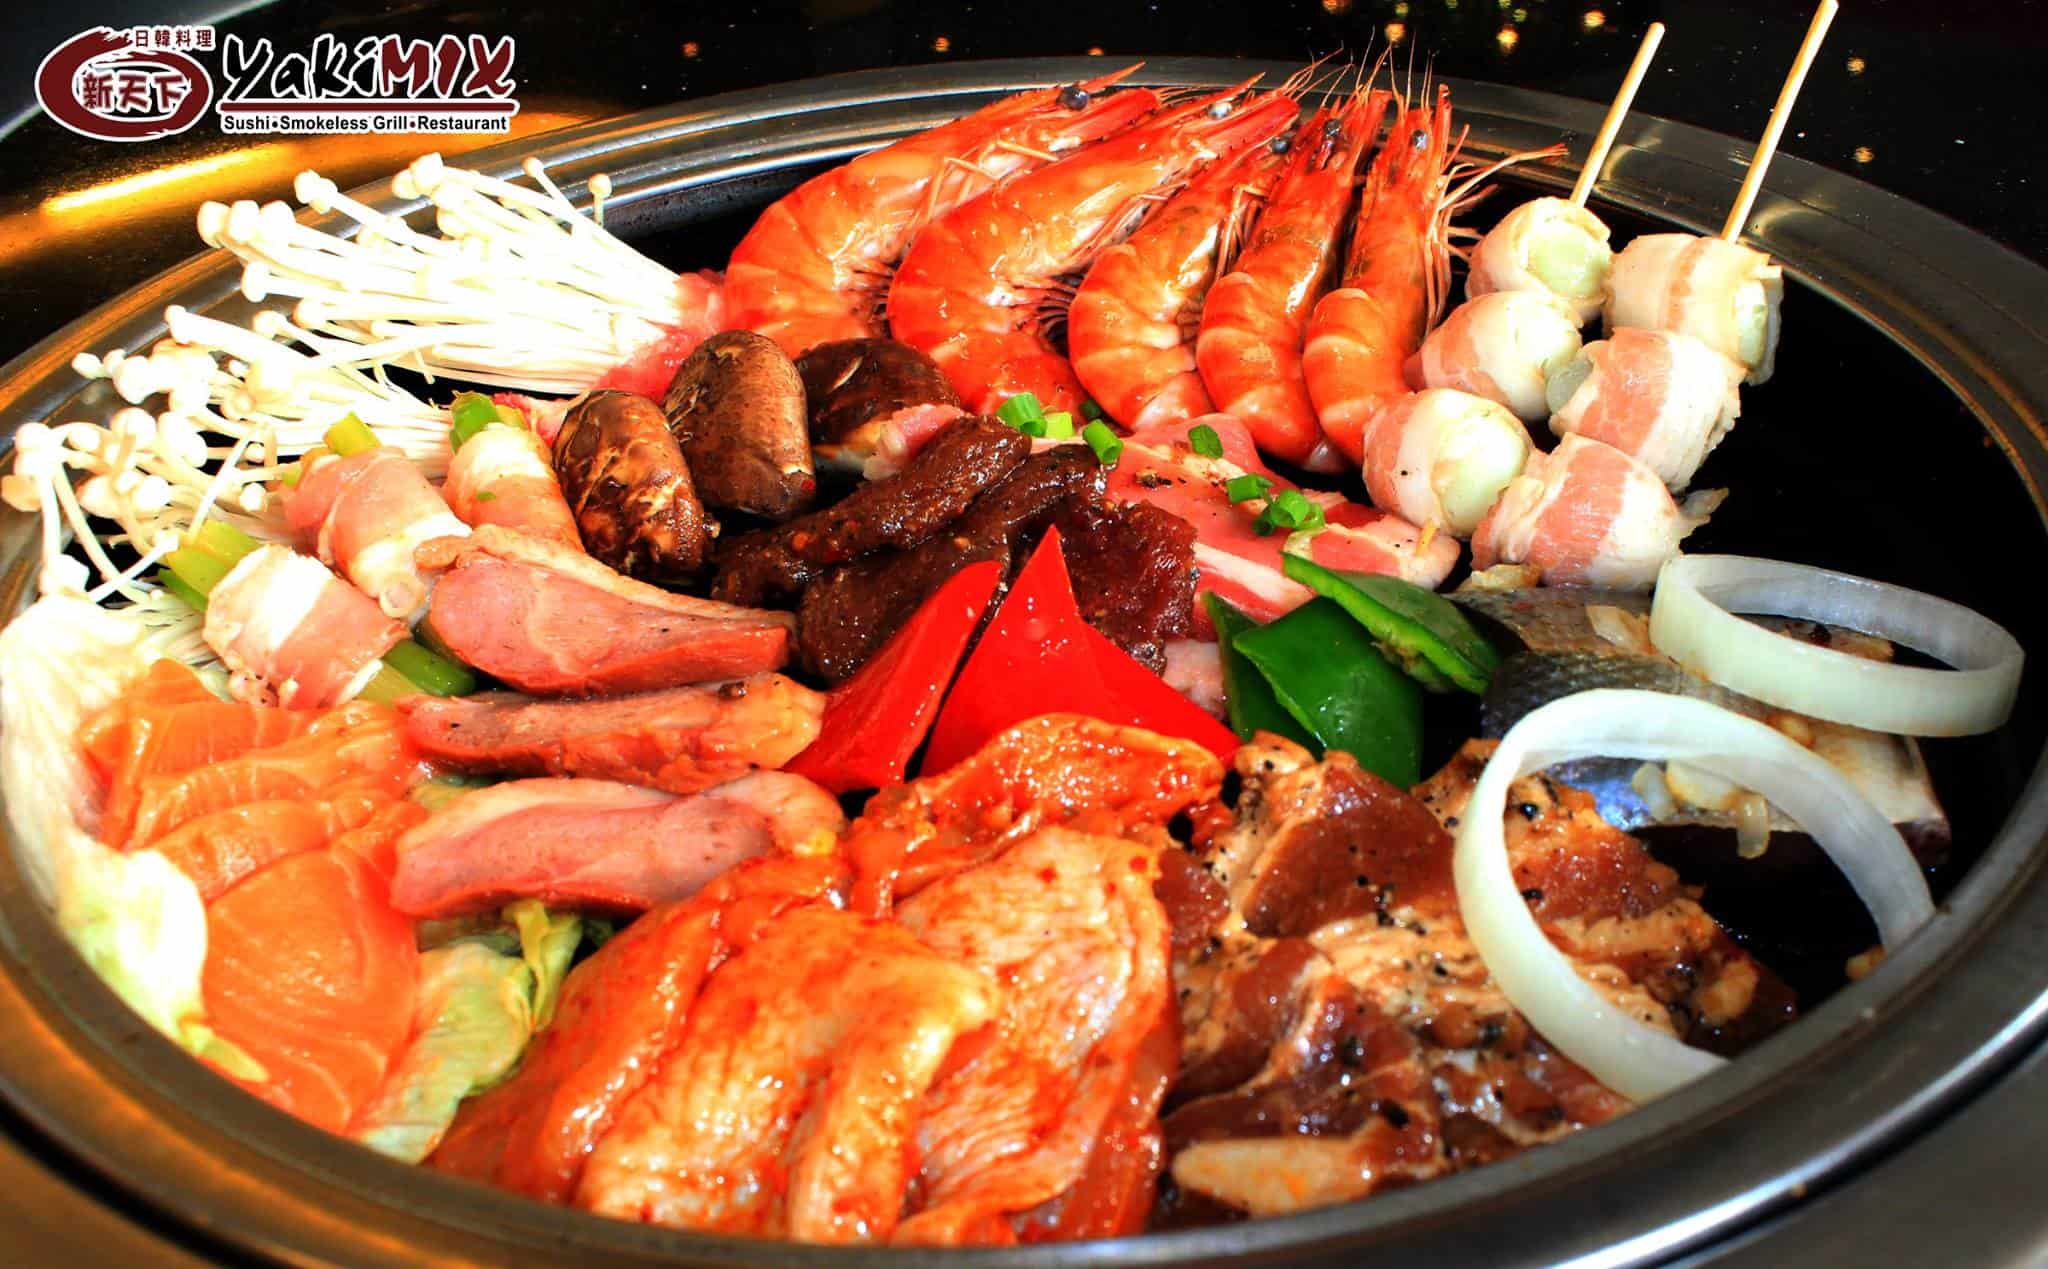 Grilled Meat on Yakimix Menu Philippines